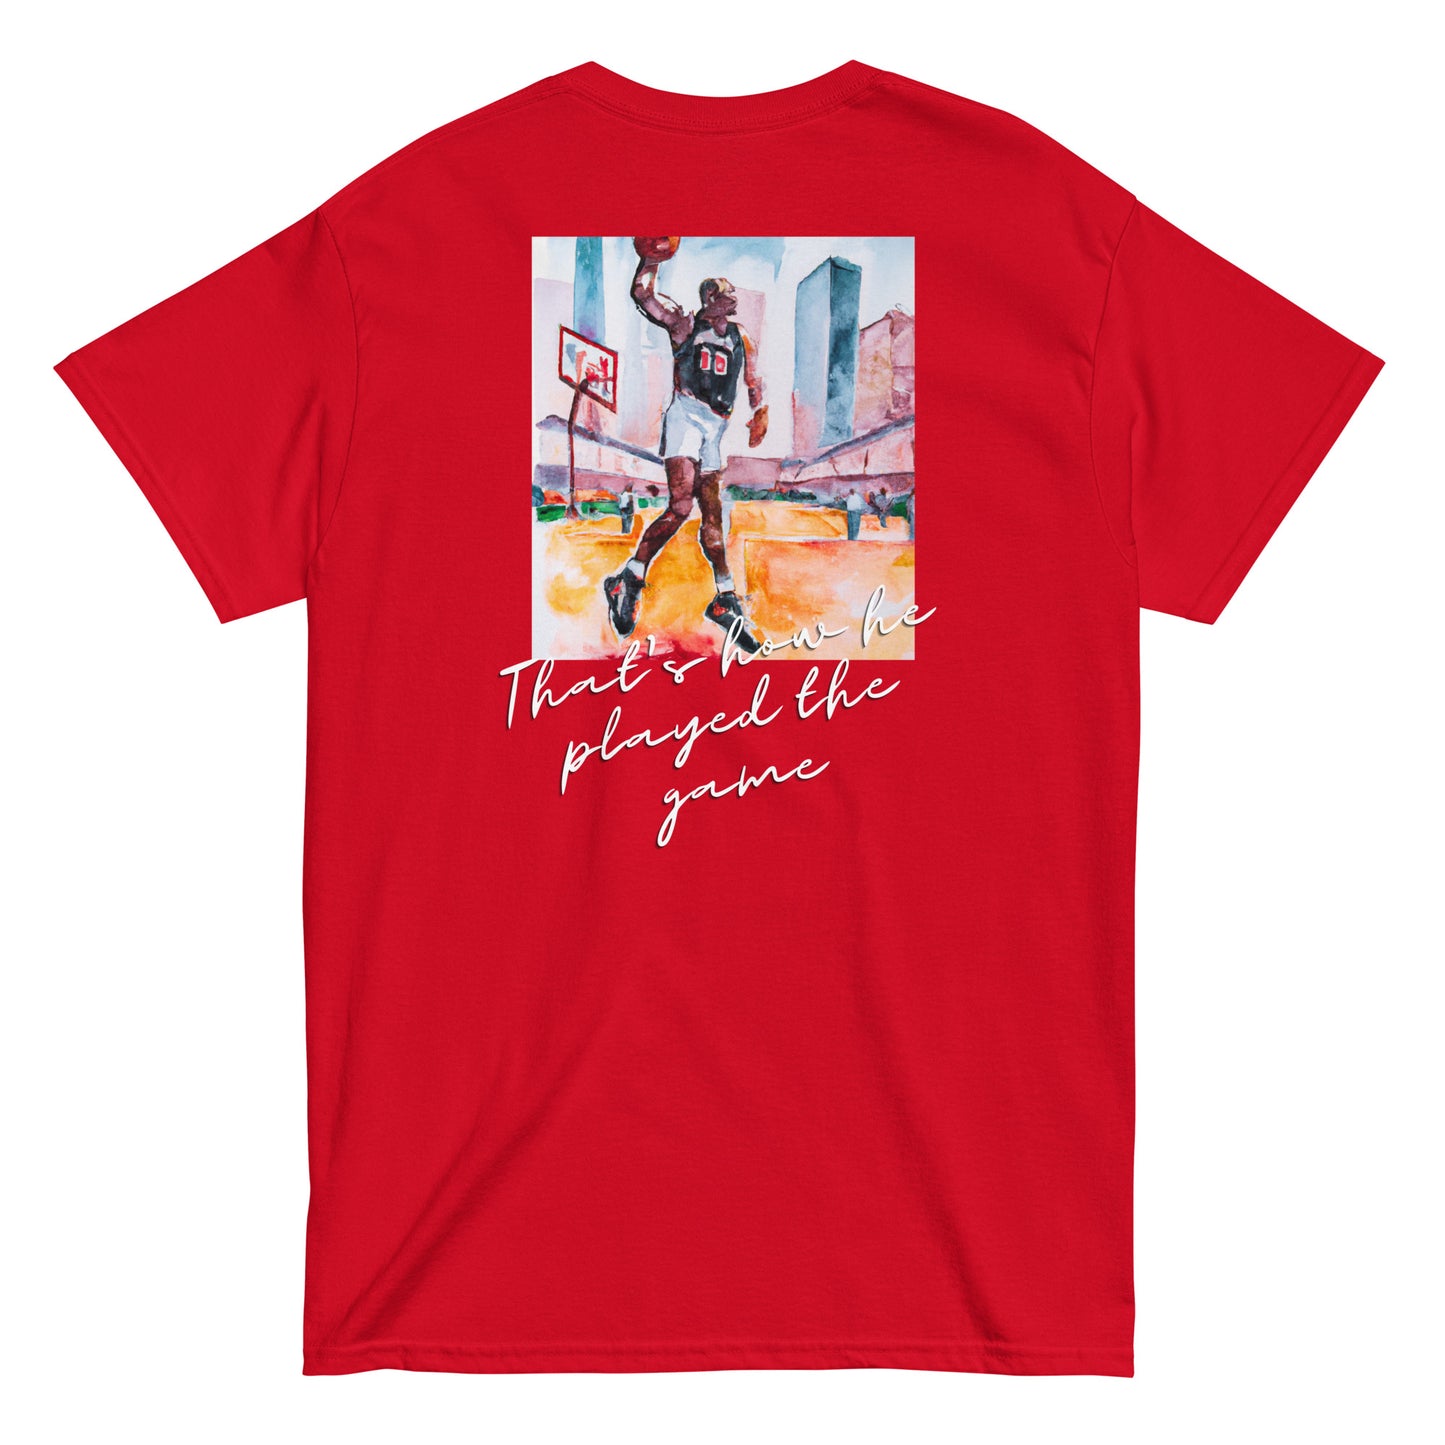 “That's How He Played The Game” Embroidered T-shirt - Red